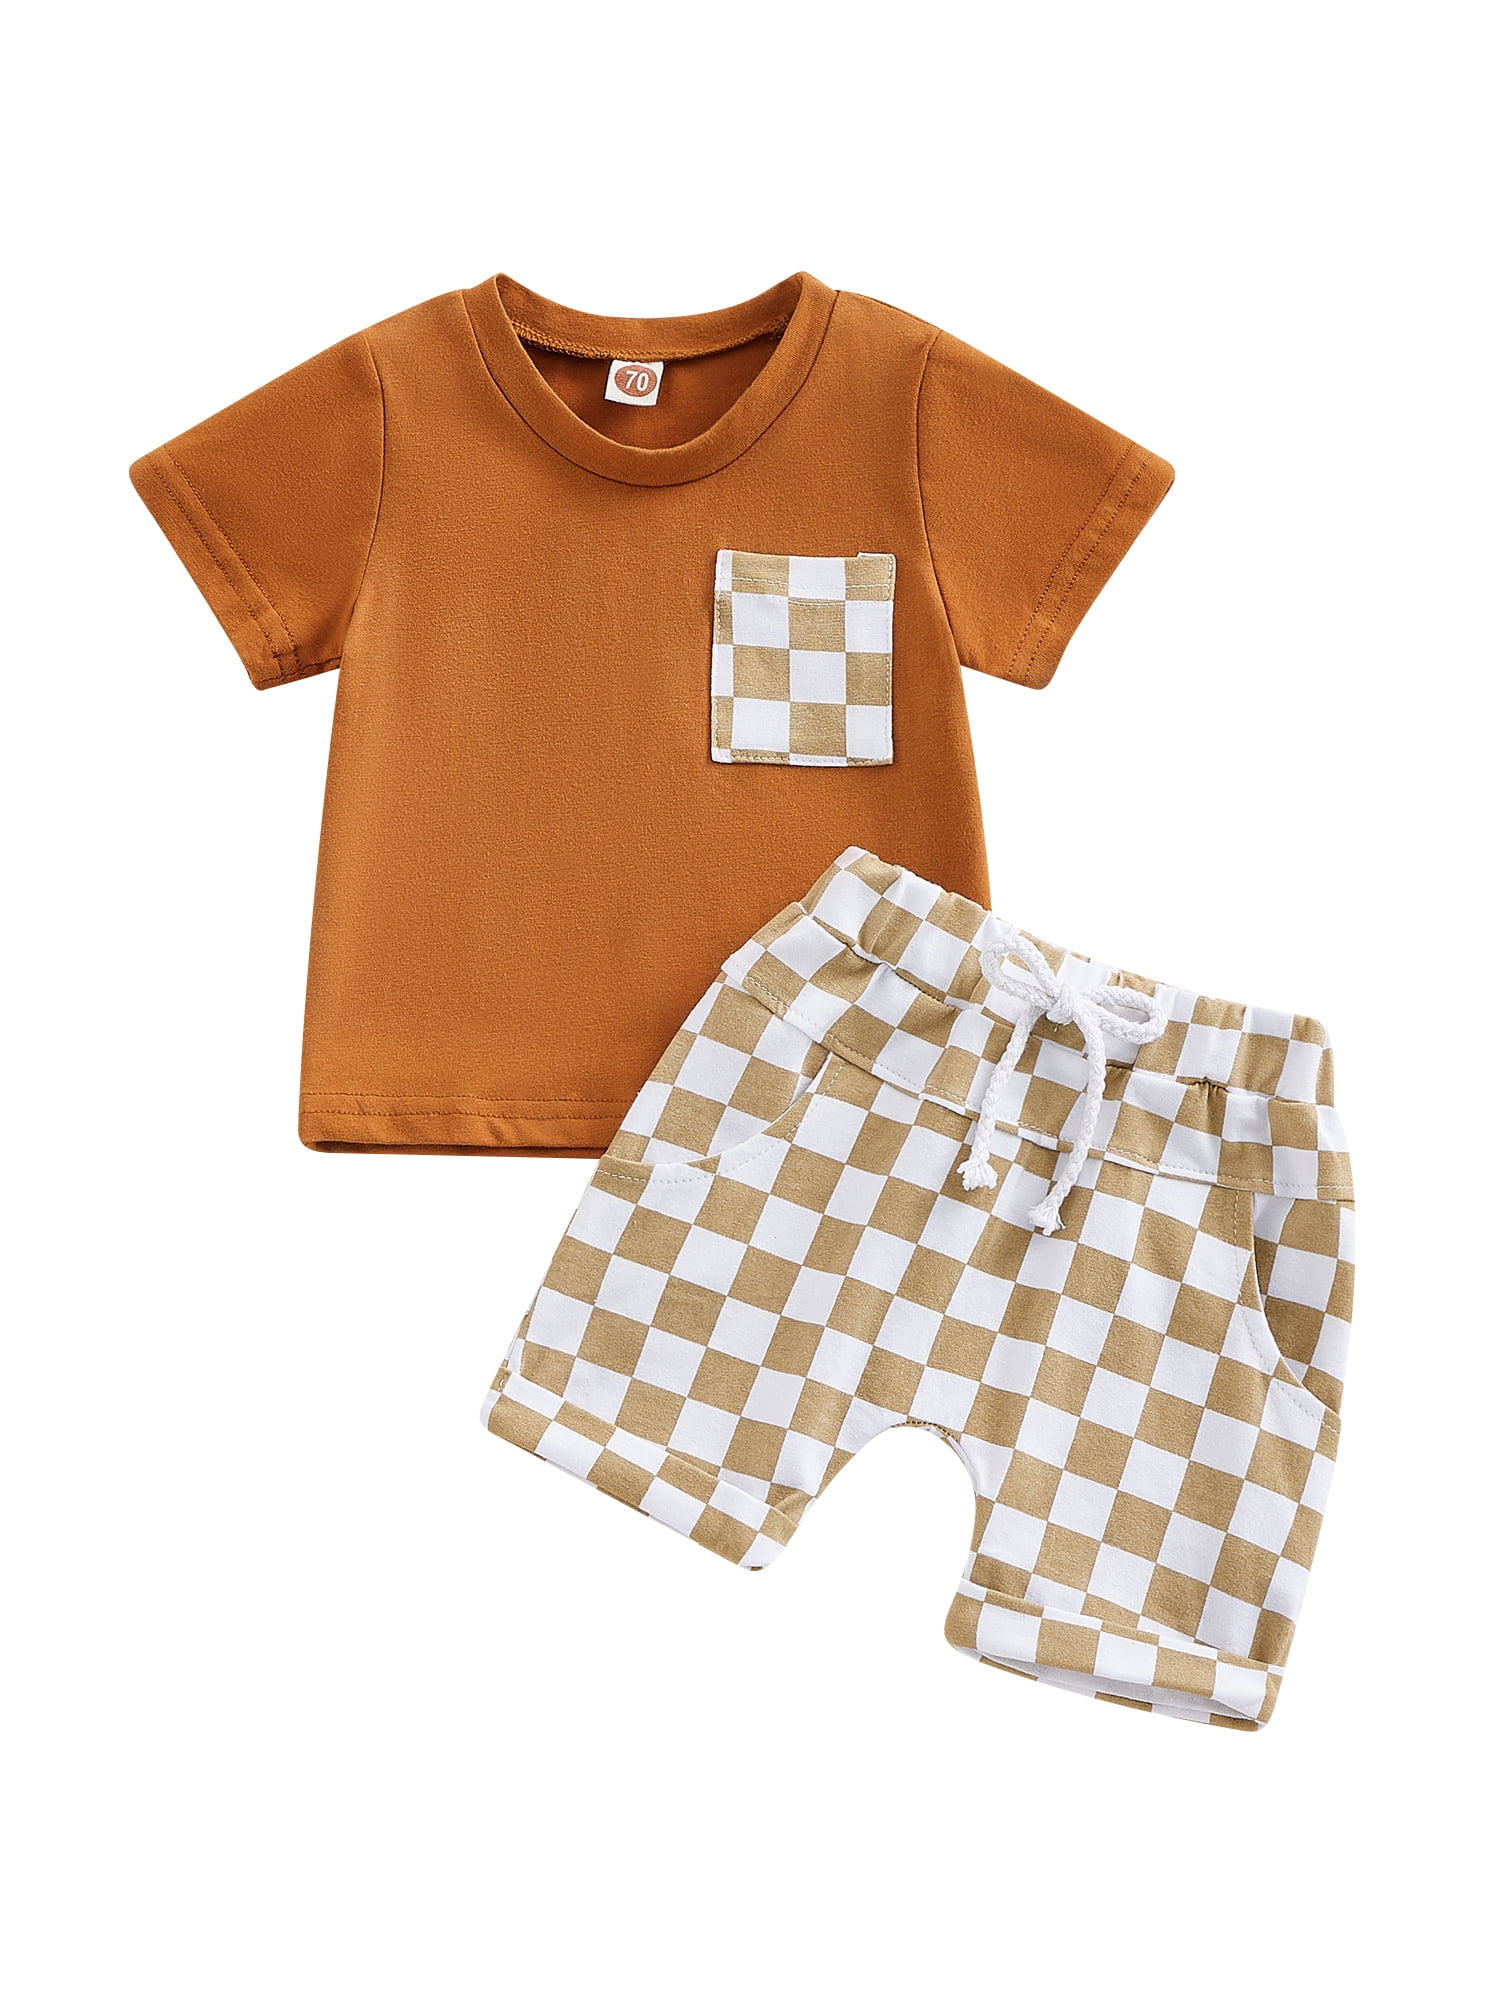 Wassery Toddler Baby Boy Summer Clothes Infant Checkerboard Short